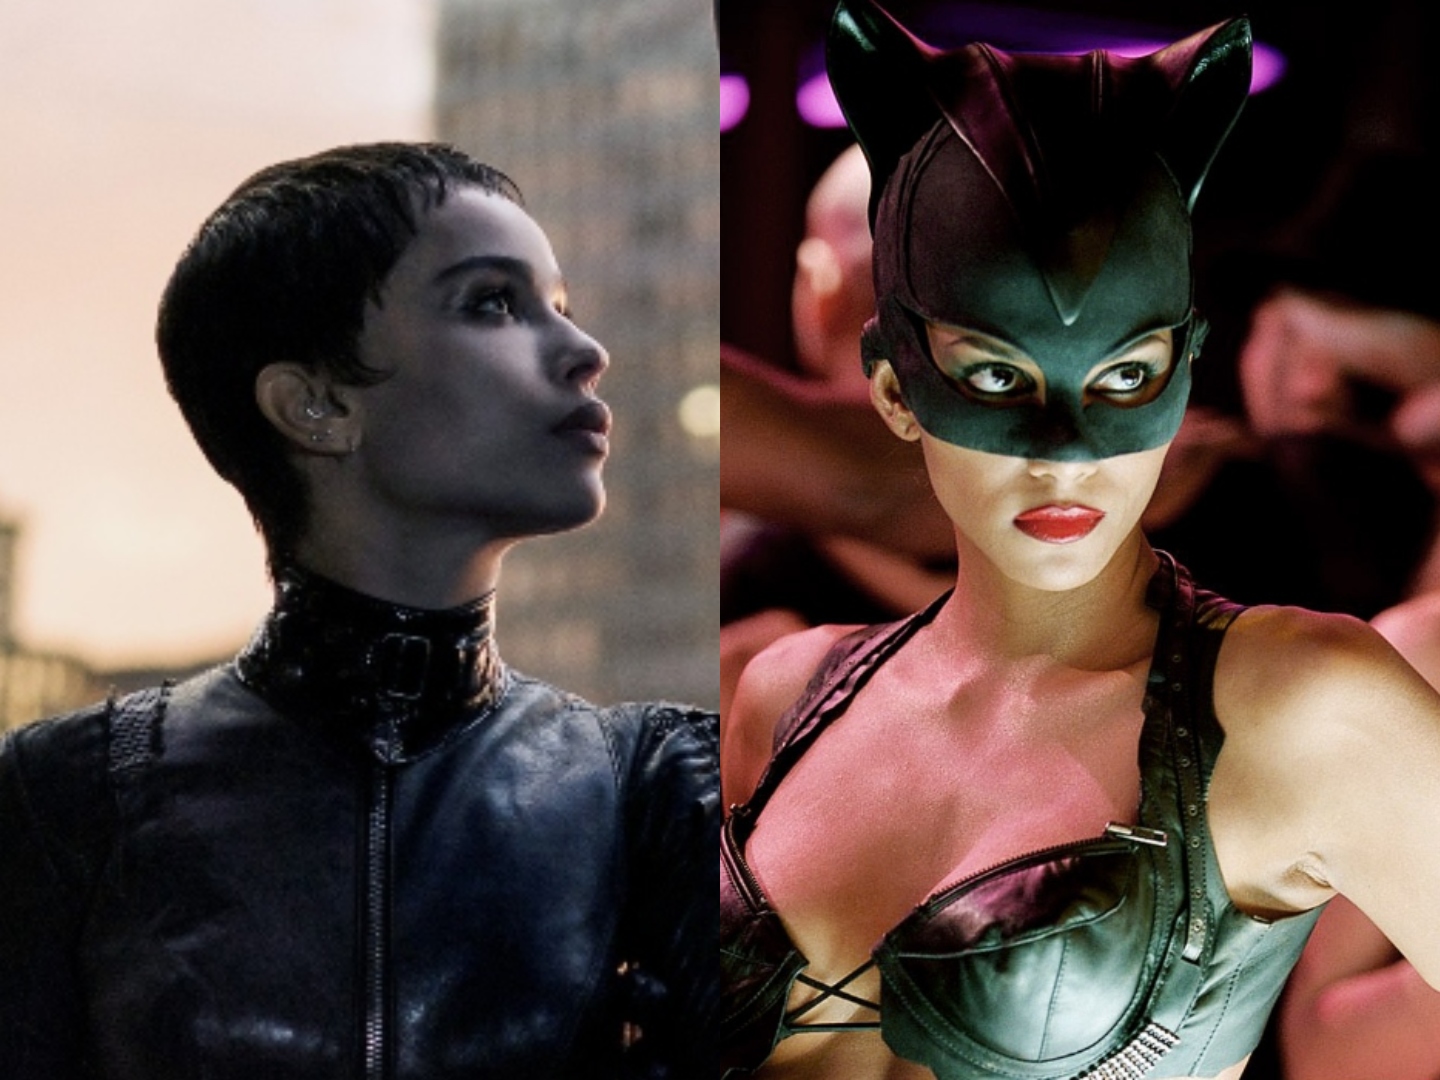 amit langeh add pictures of catwoman photo